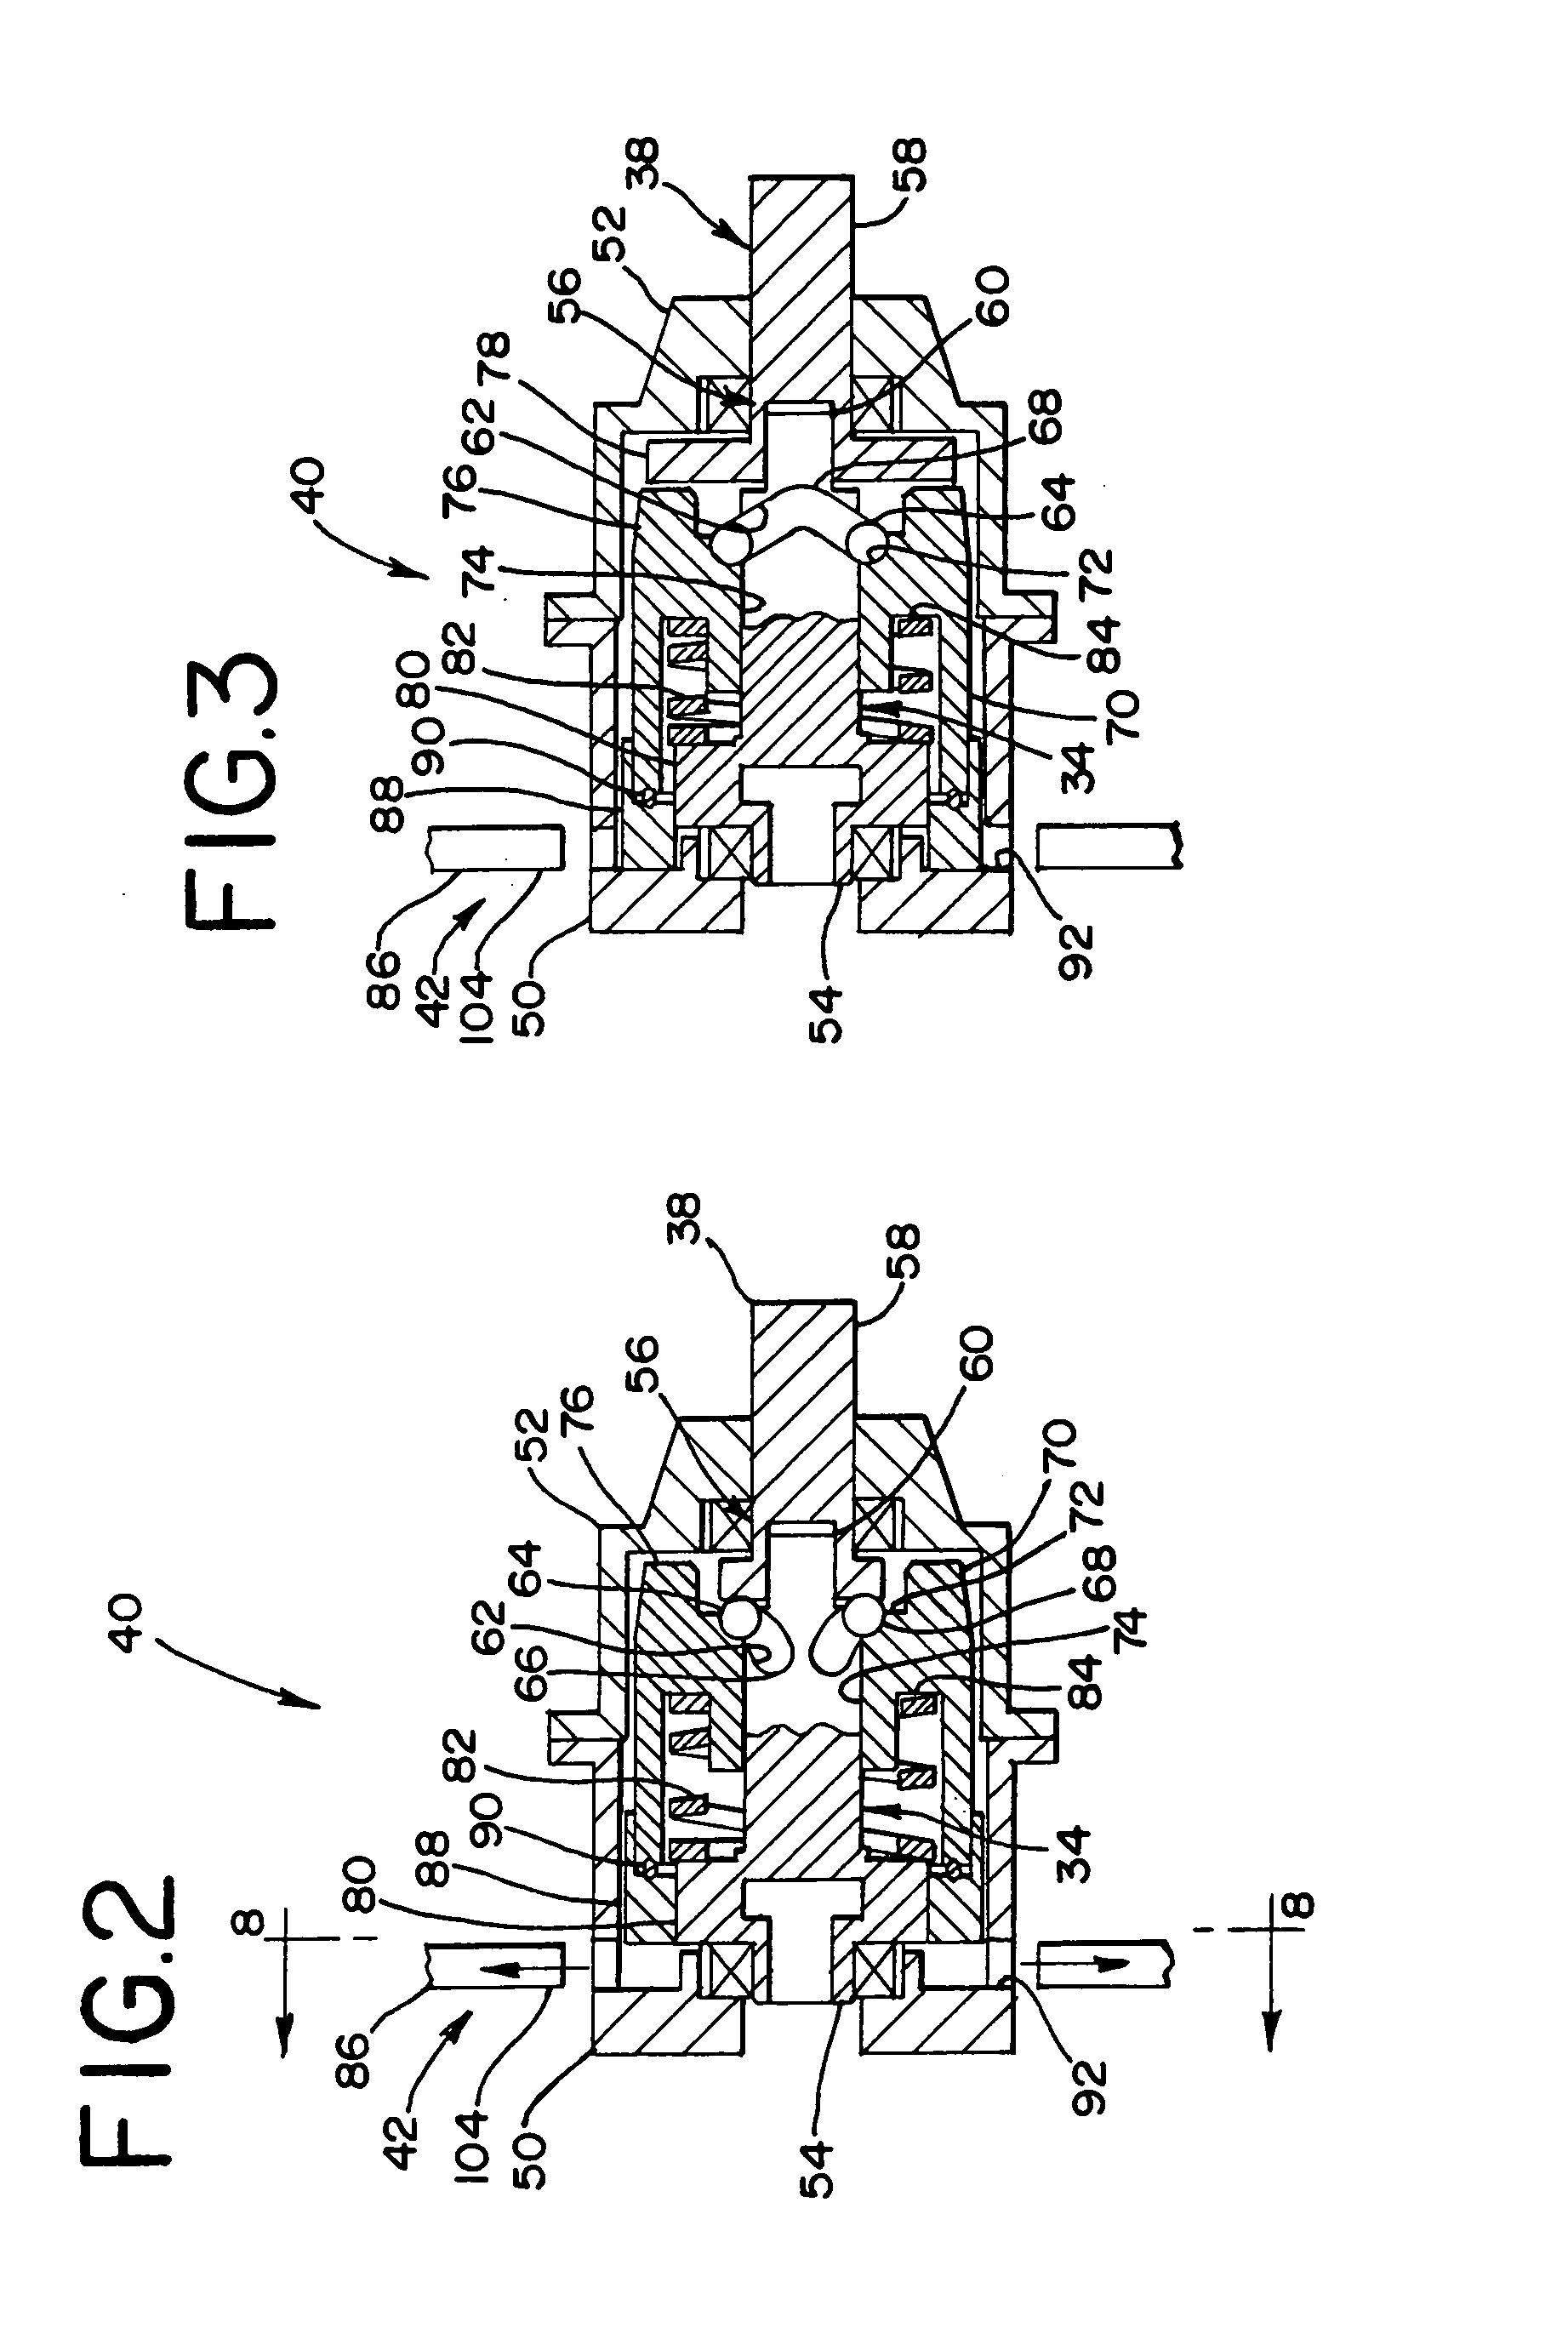 Mode selector mechanism for an impact driver